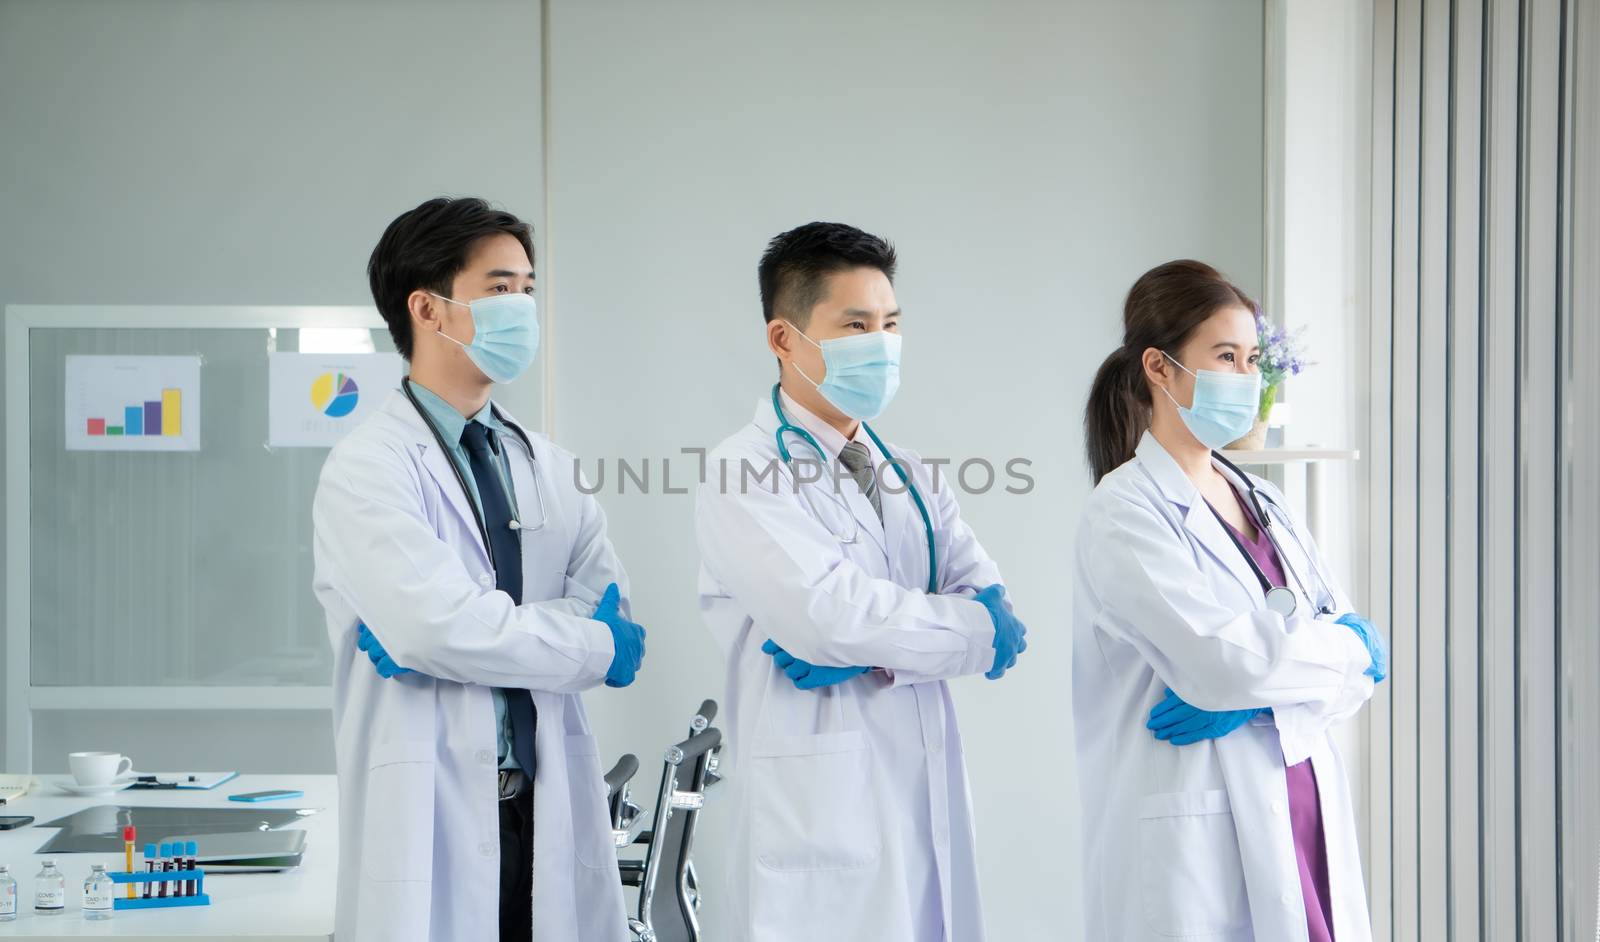 The virus is spreading strongly. Medical team Asian people wear protective masks and meeting together at the hospital.